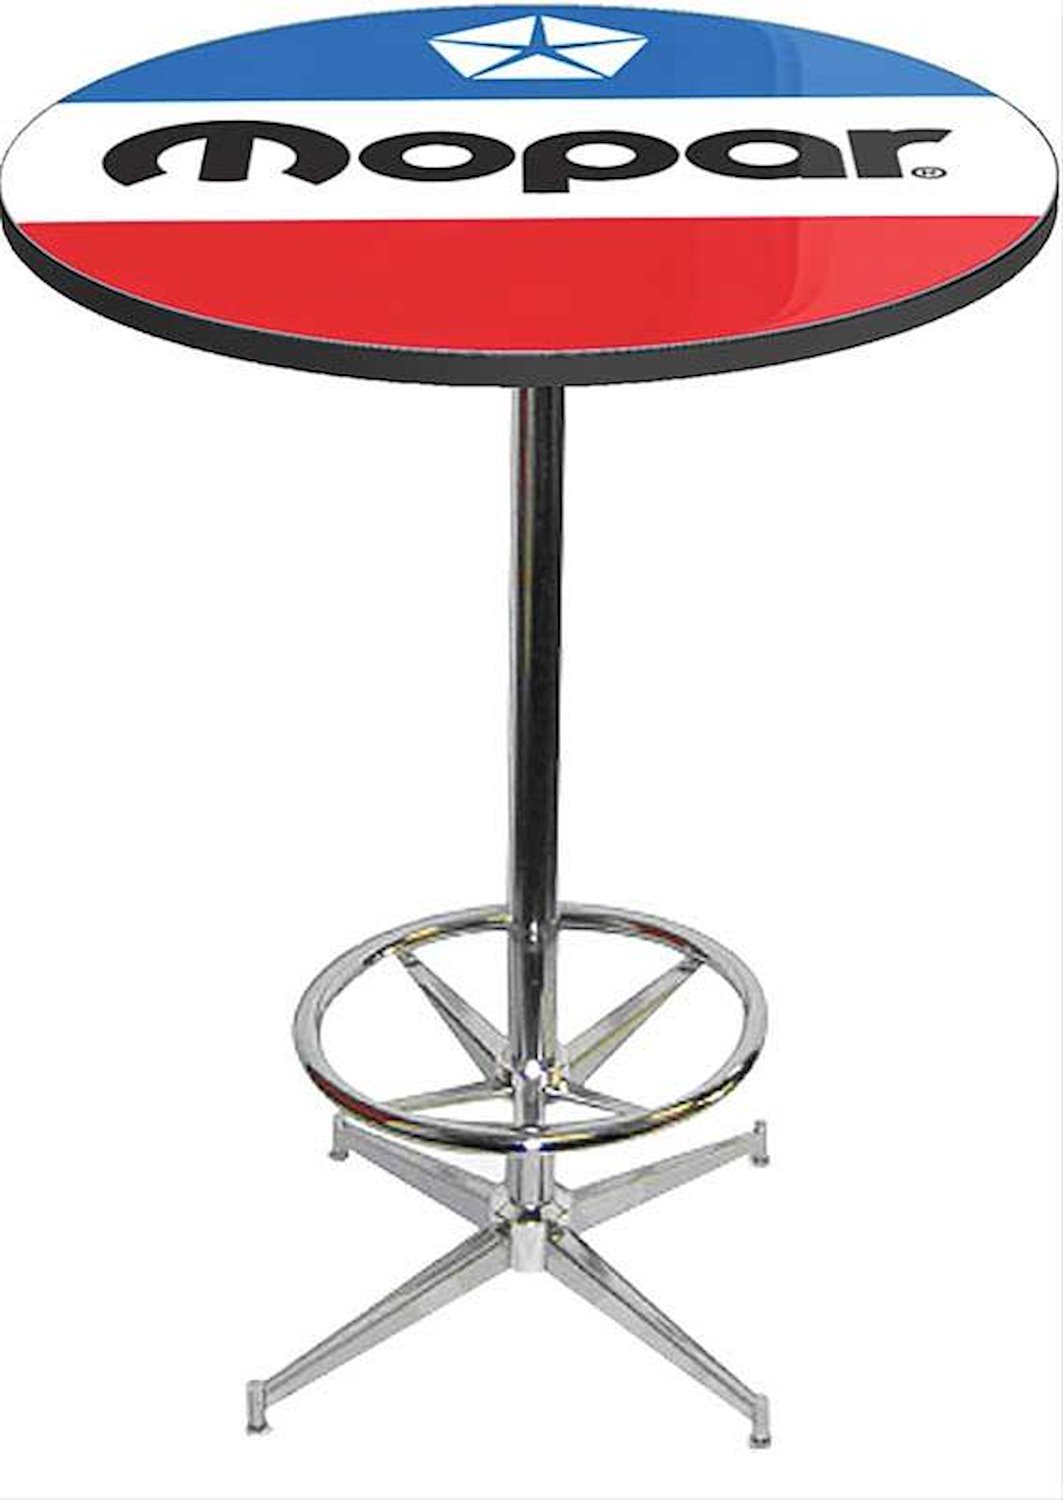 MD673107 Pub Table With Chrome Base And Foot Rest 1972-84 Style Red White And Blue Mopar Logo Pub Table With Chrome Base And Foo